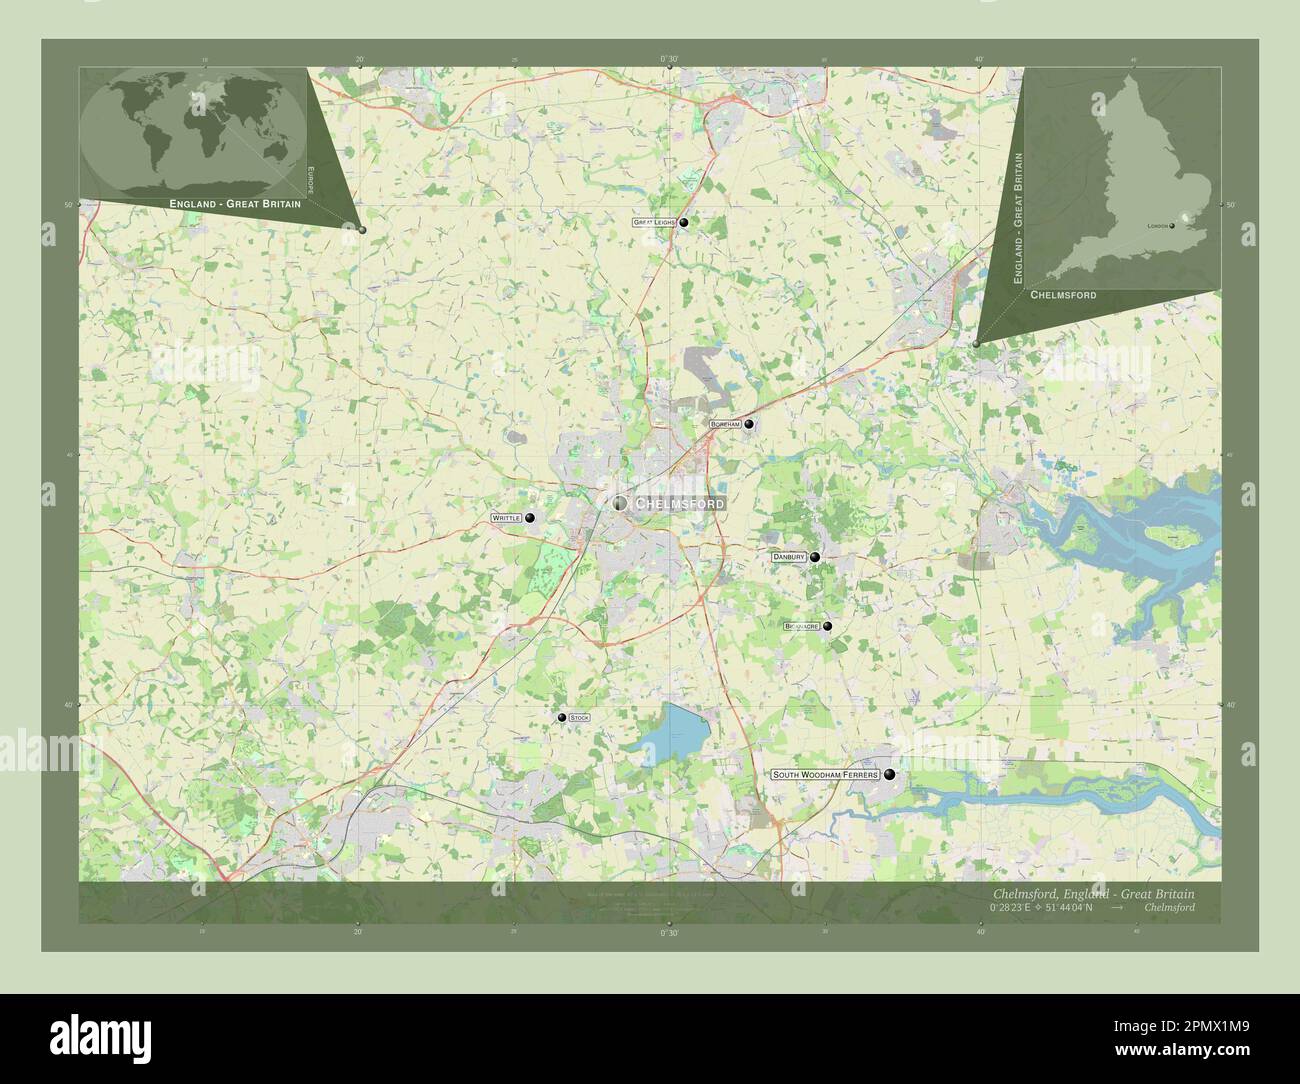 Chelmsford, non metropolitan district of England - Great Britain. Open Street Map. Locations and names of major cities of the region. Corner auxiliary Stock Photo